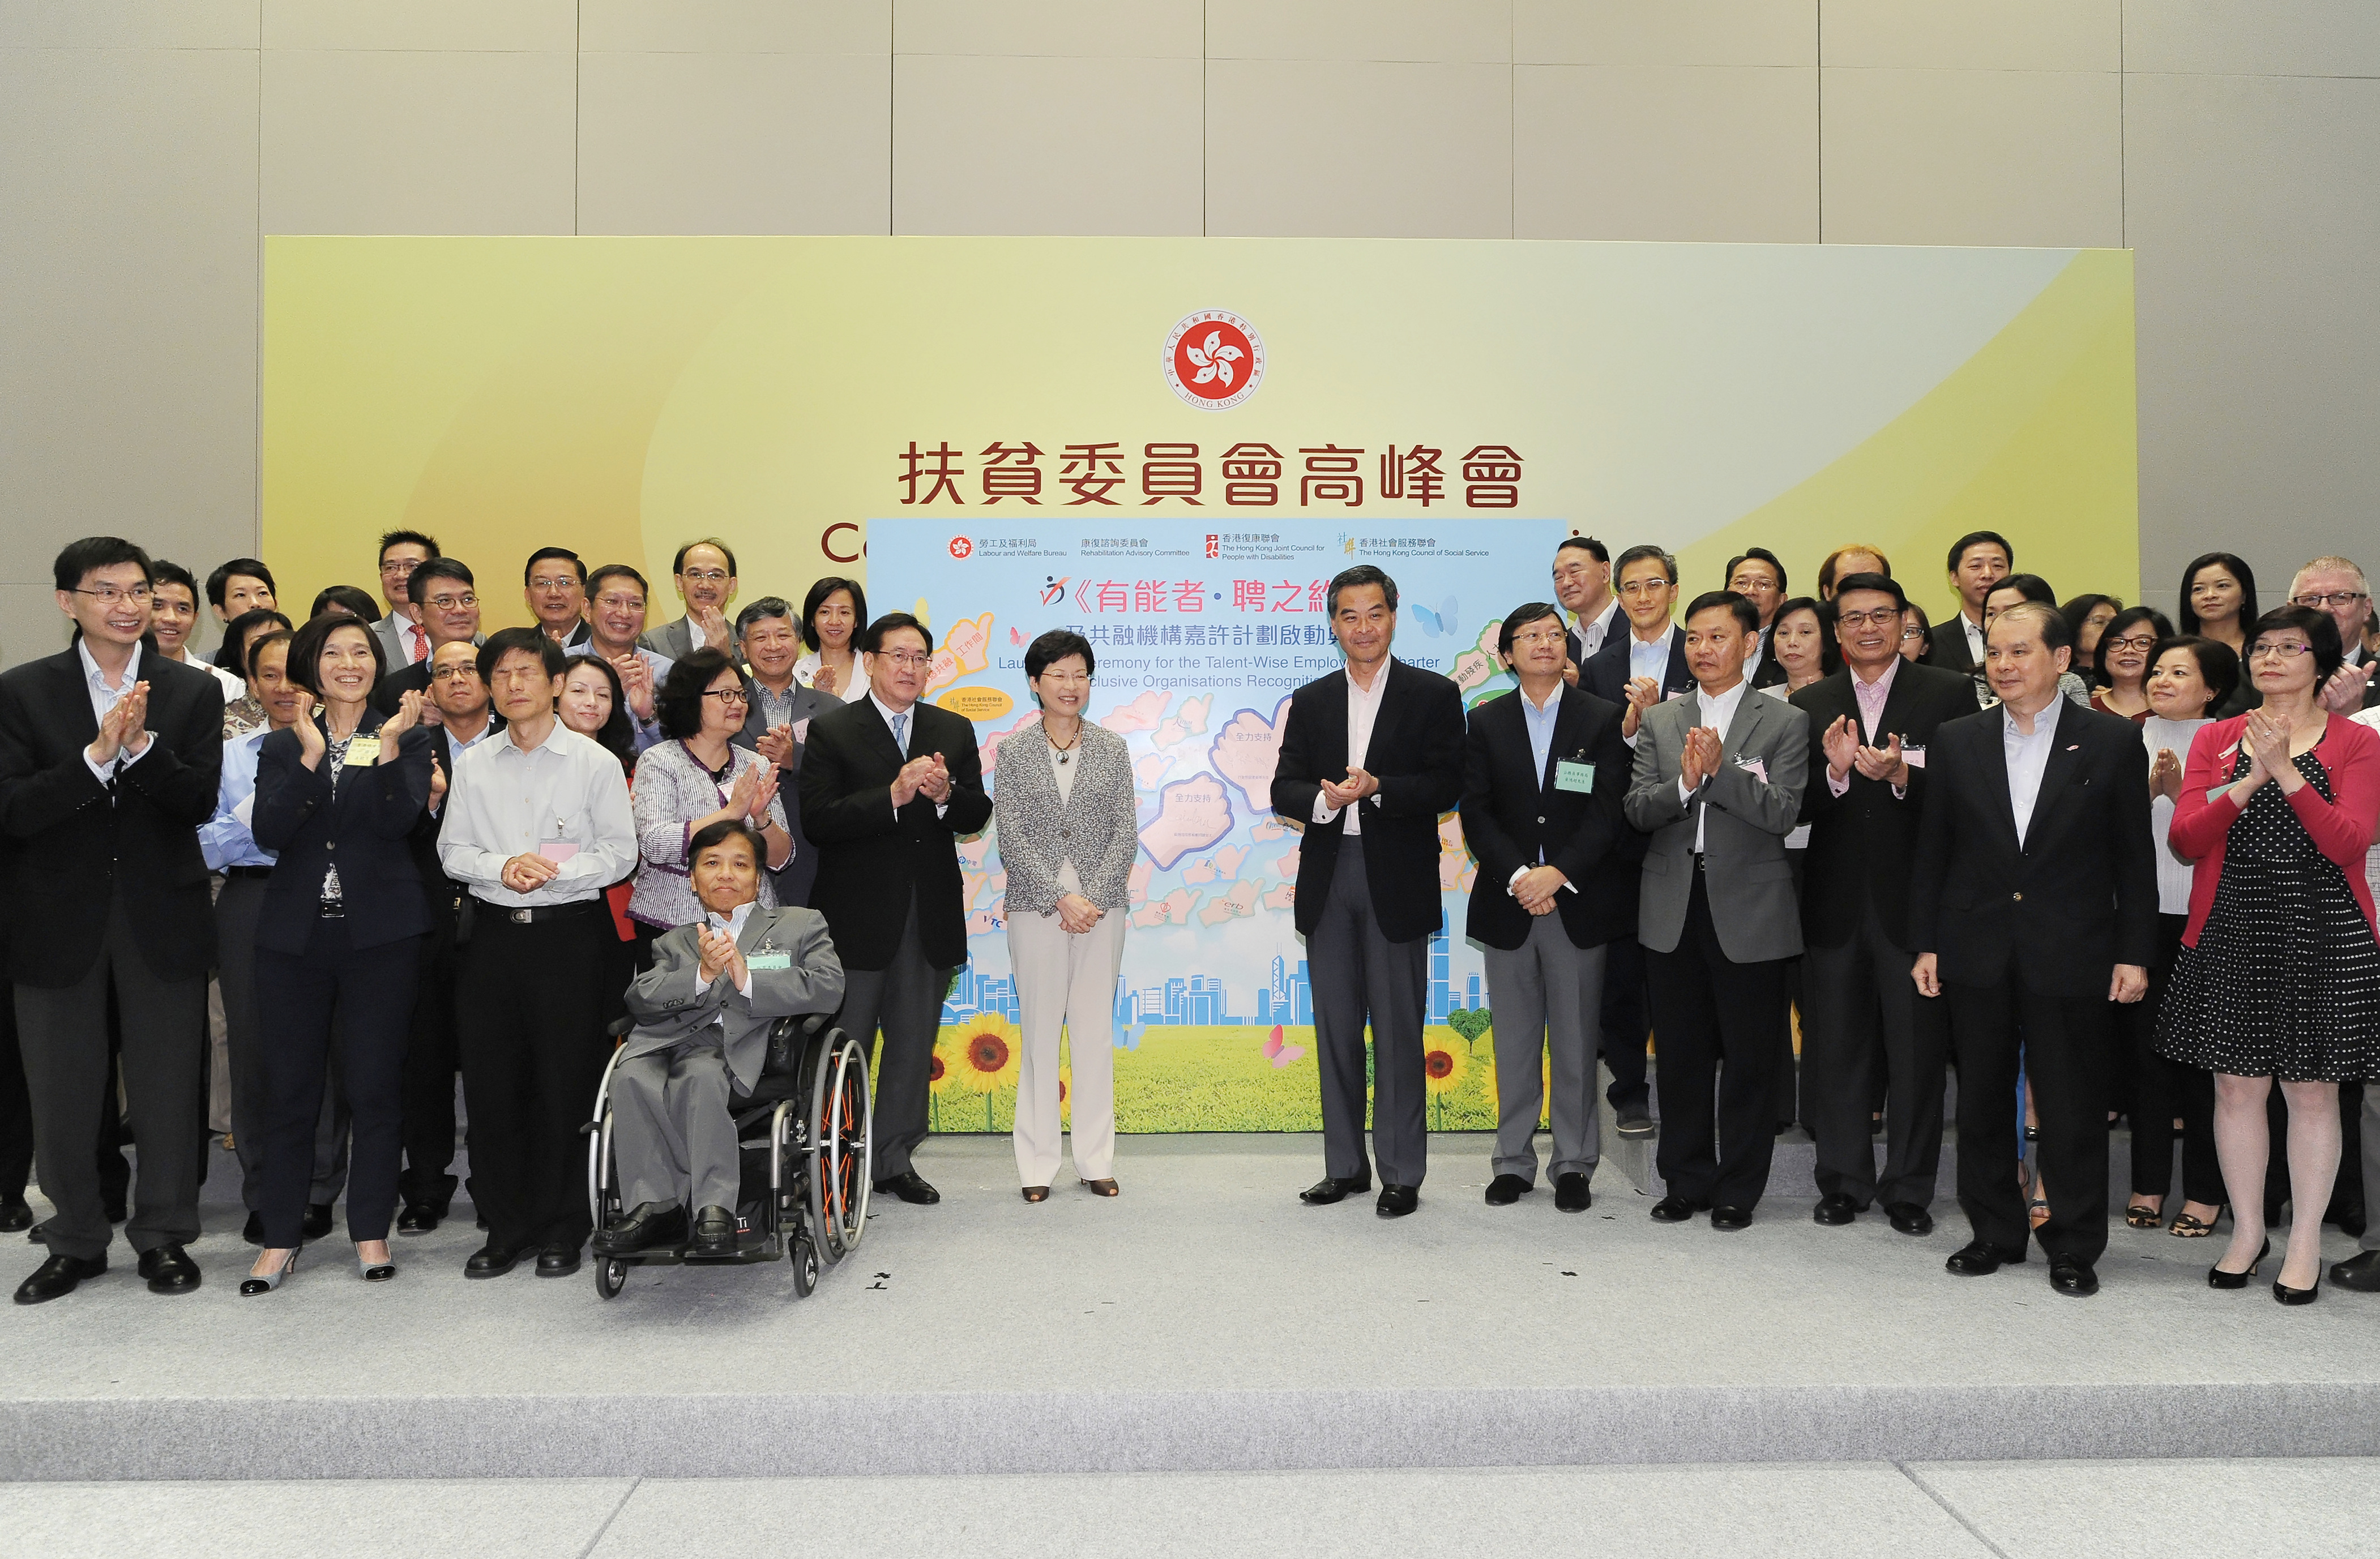 The Chief Executive, Mr C Y LEUNG, GBM, GBS, JP and the Chief Secretary for Administration, Mrs Carrie LAM, GBS, JP led the pioneer partners of the Scheme to support the employment of persons with disabilities